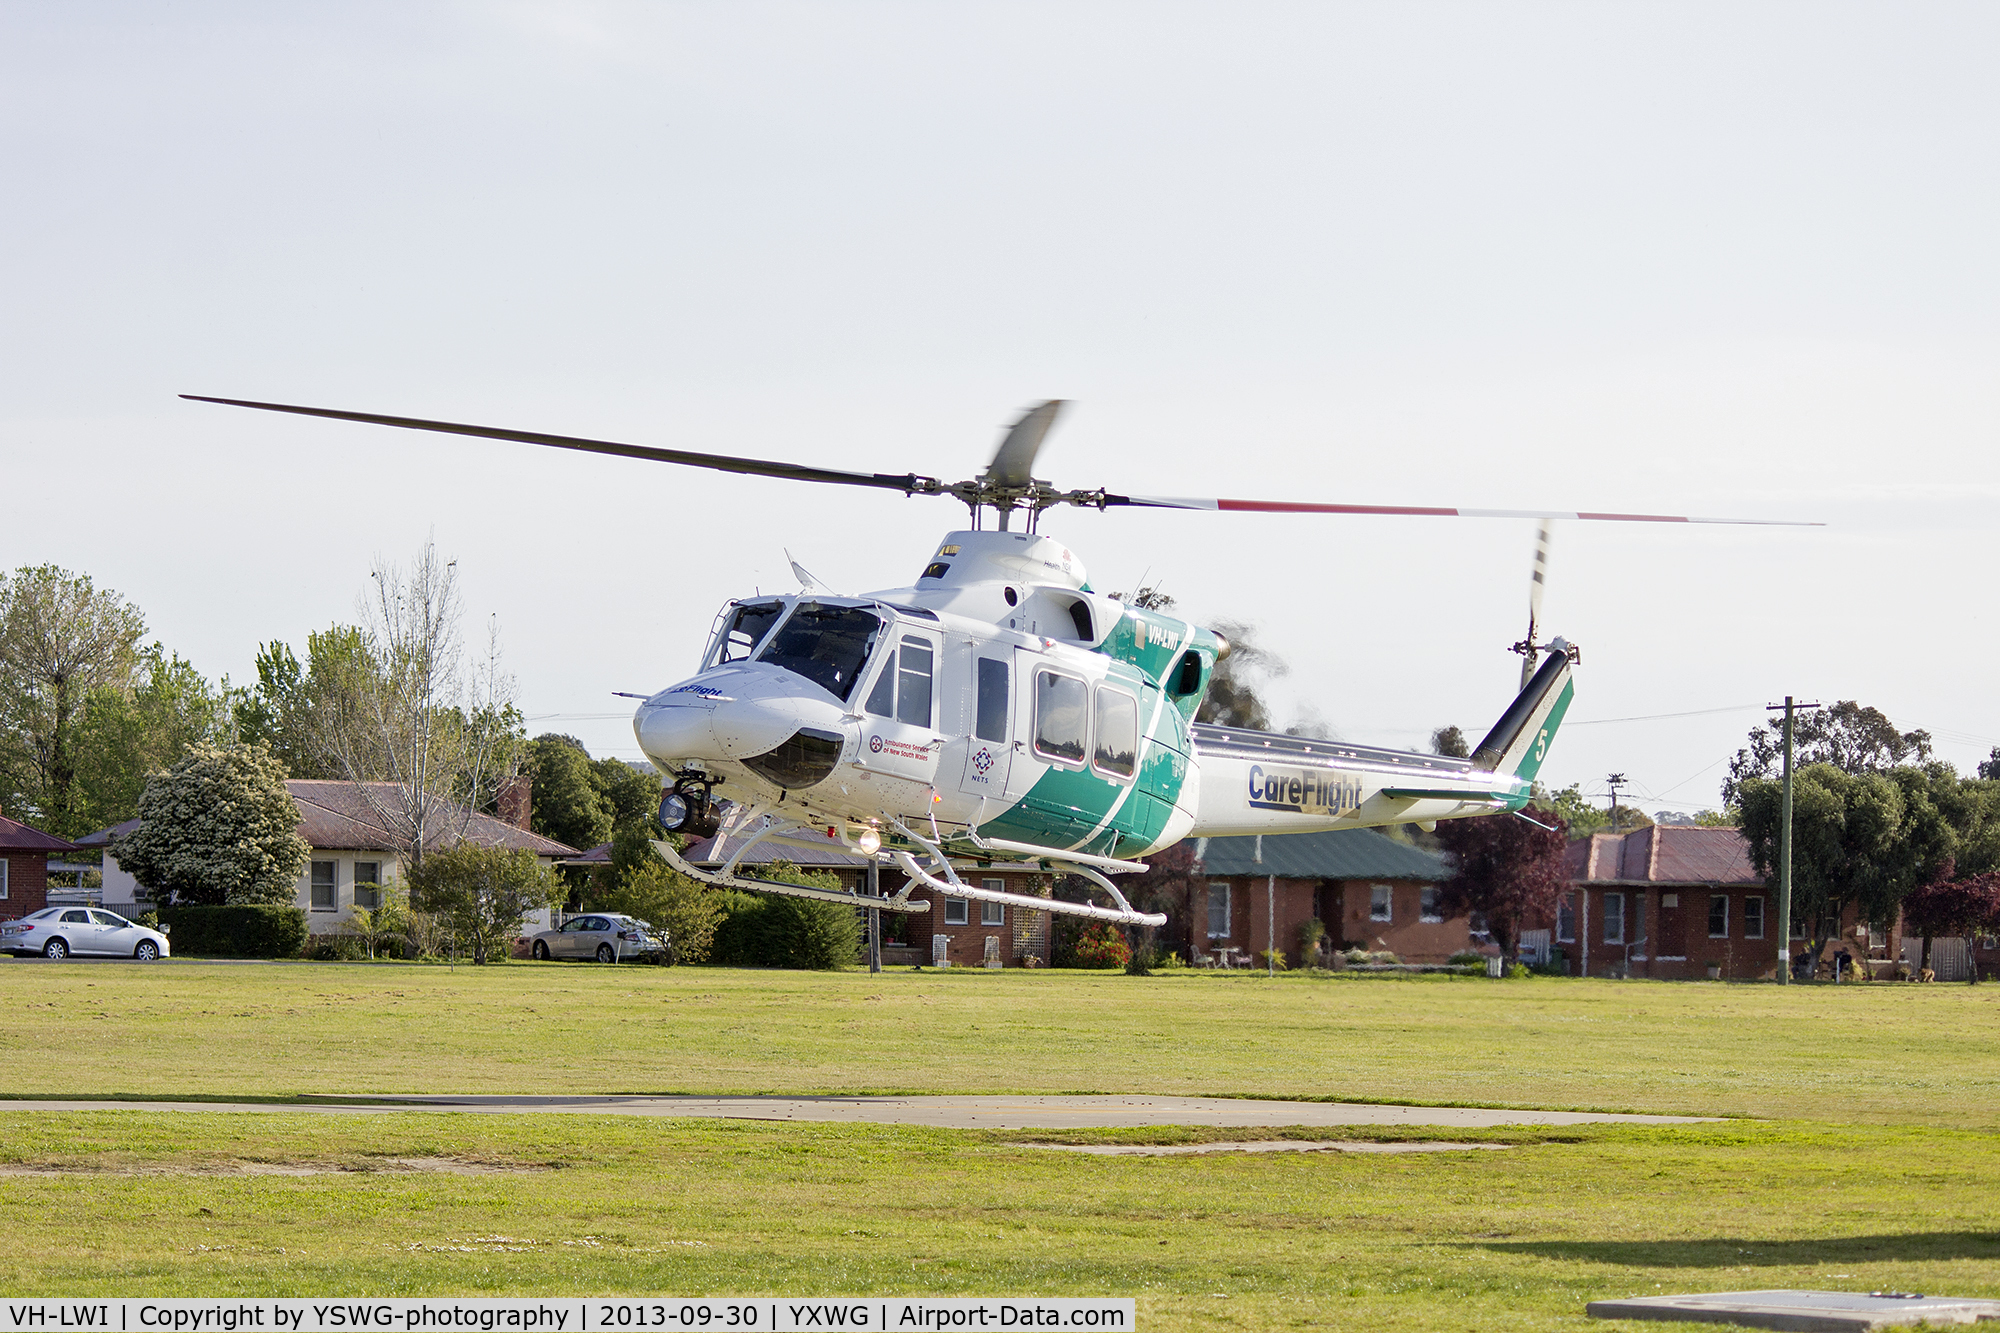 VH-LWI, 2011 Bell 412EP C/N 36573, CareFlight (VH-LWI) Bell 412EP taking off from the Duke of Kent Oval helipad.